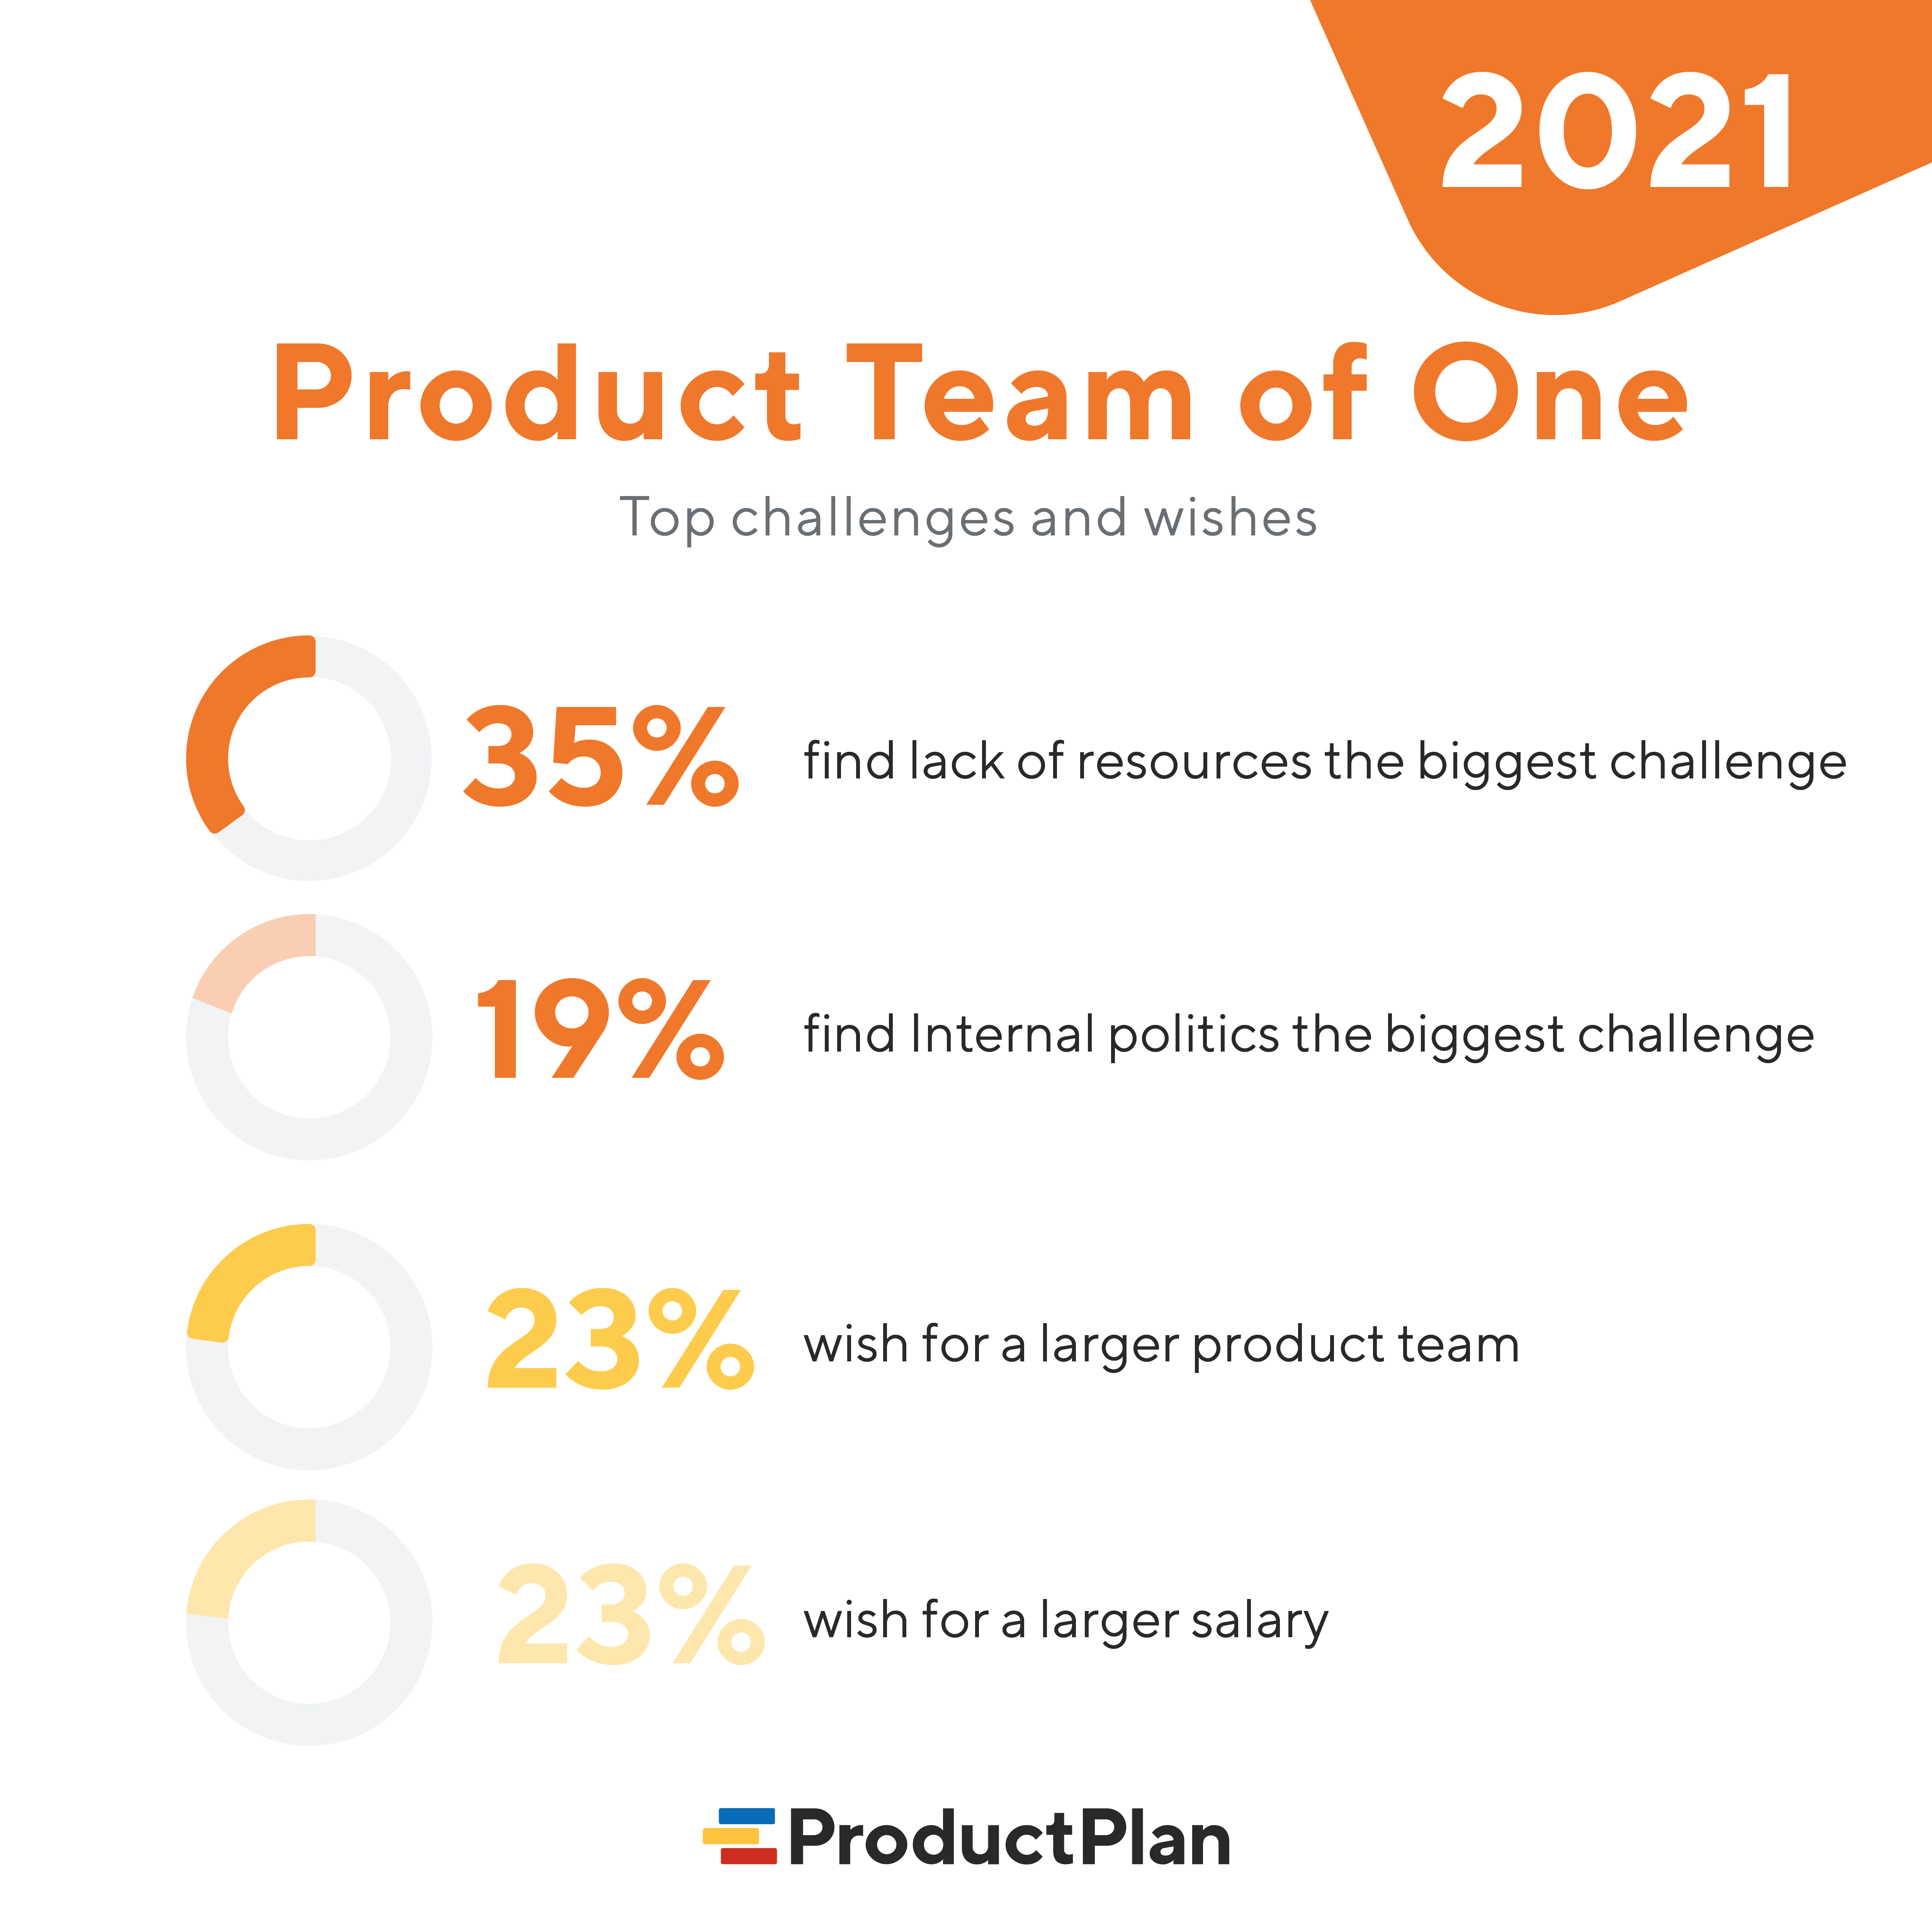 Product team of one challenges and wishes | ProductPlan